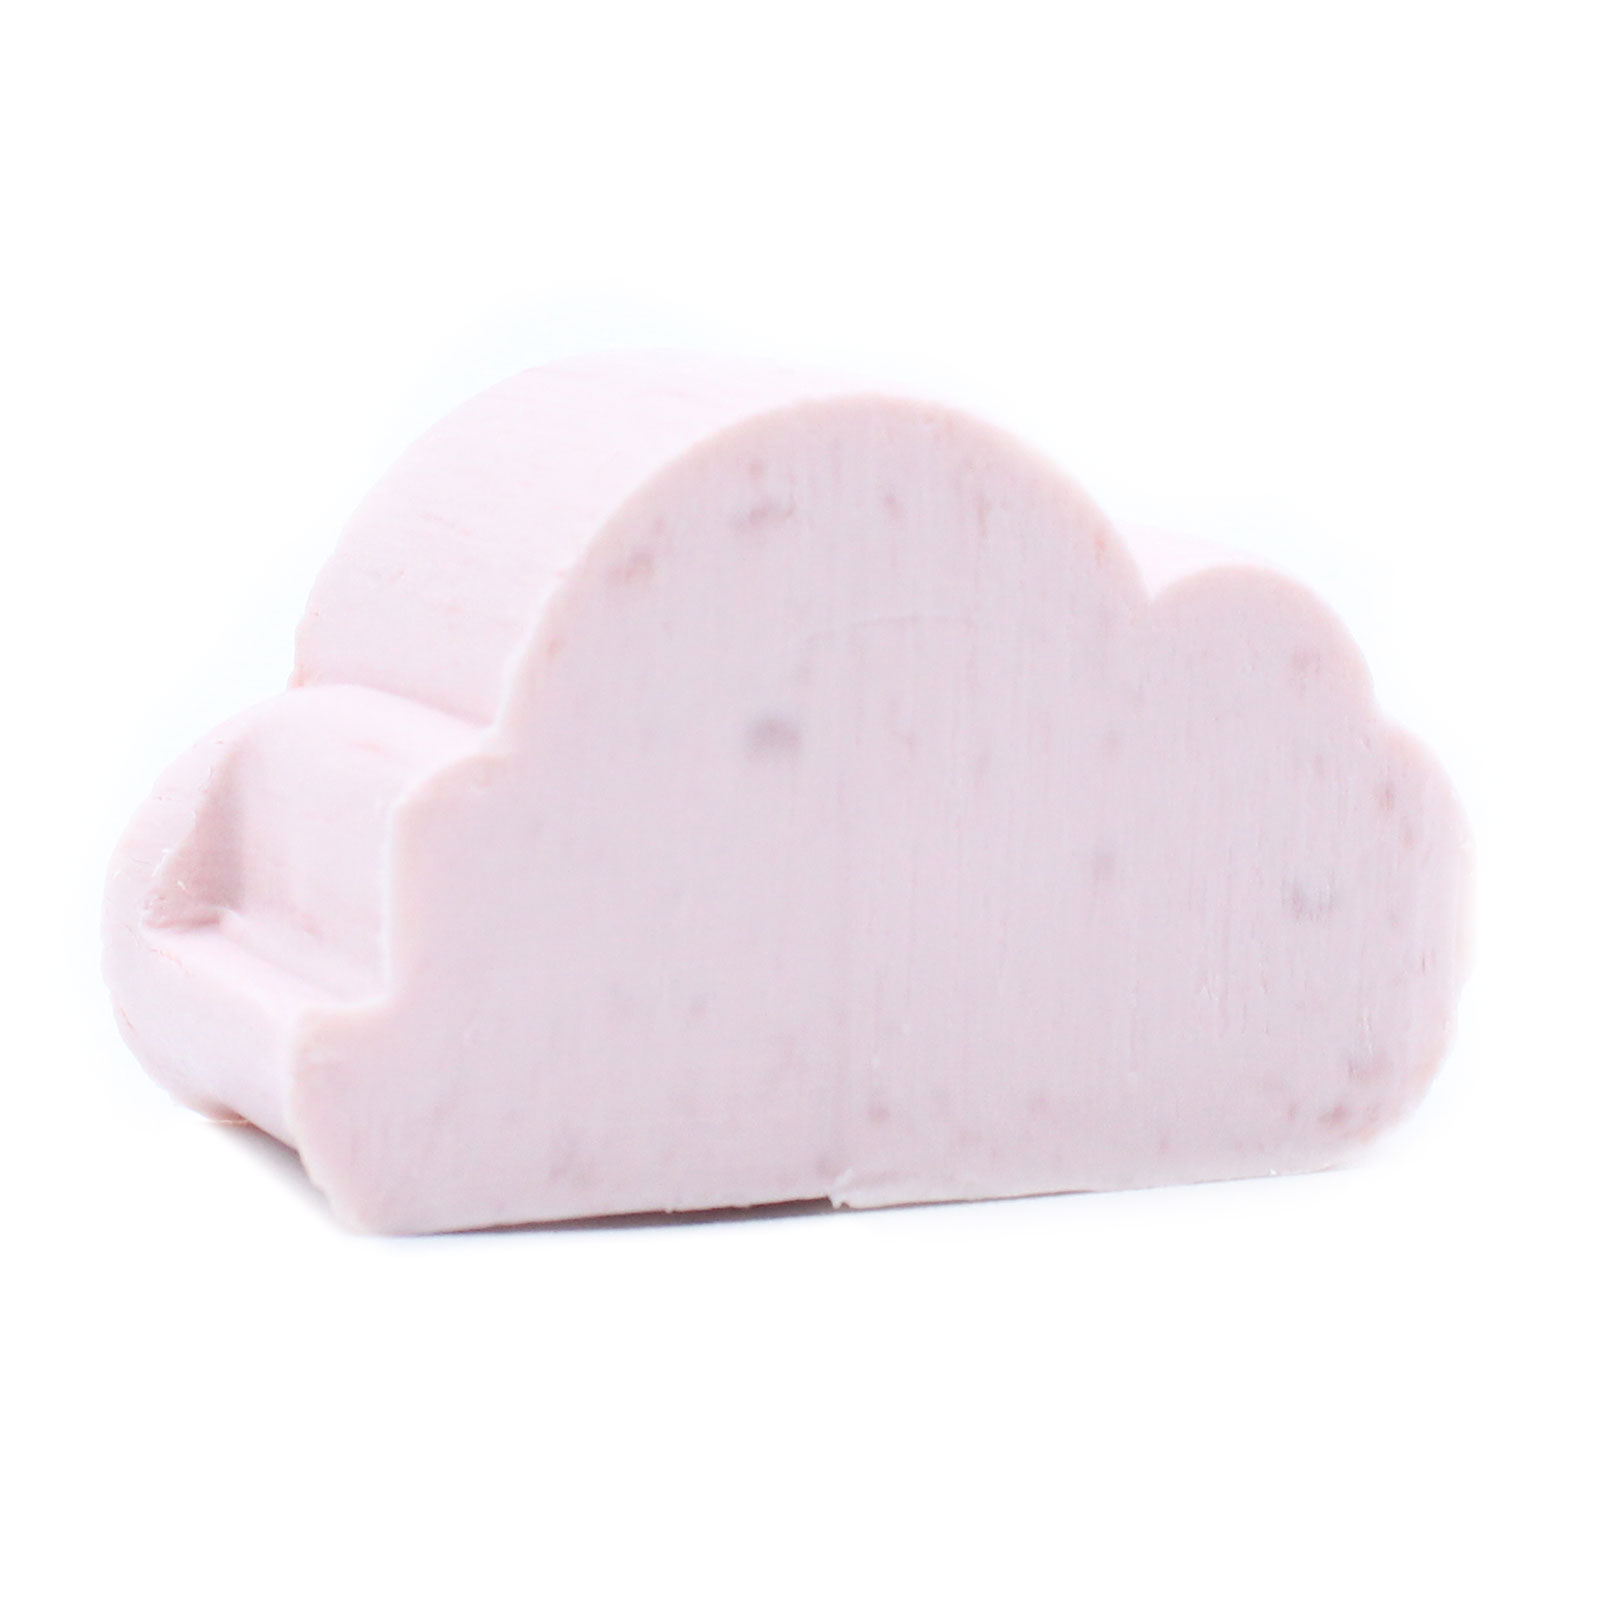 10 Cloud Guest Soaps - Marshmallow - Click Image to Close